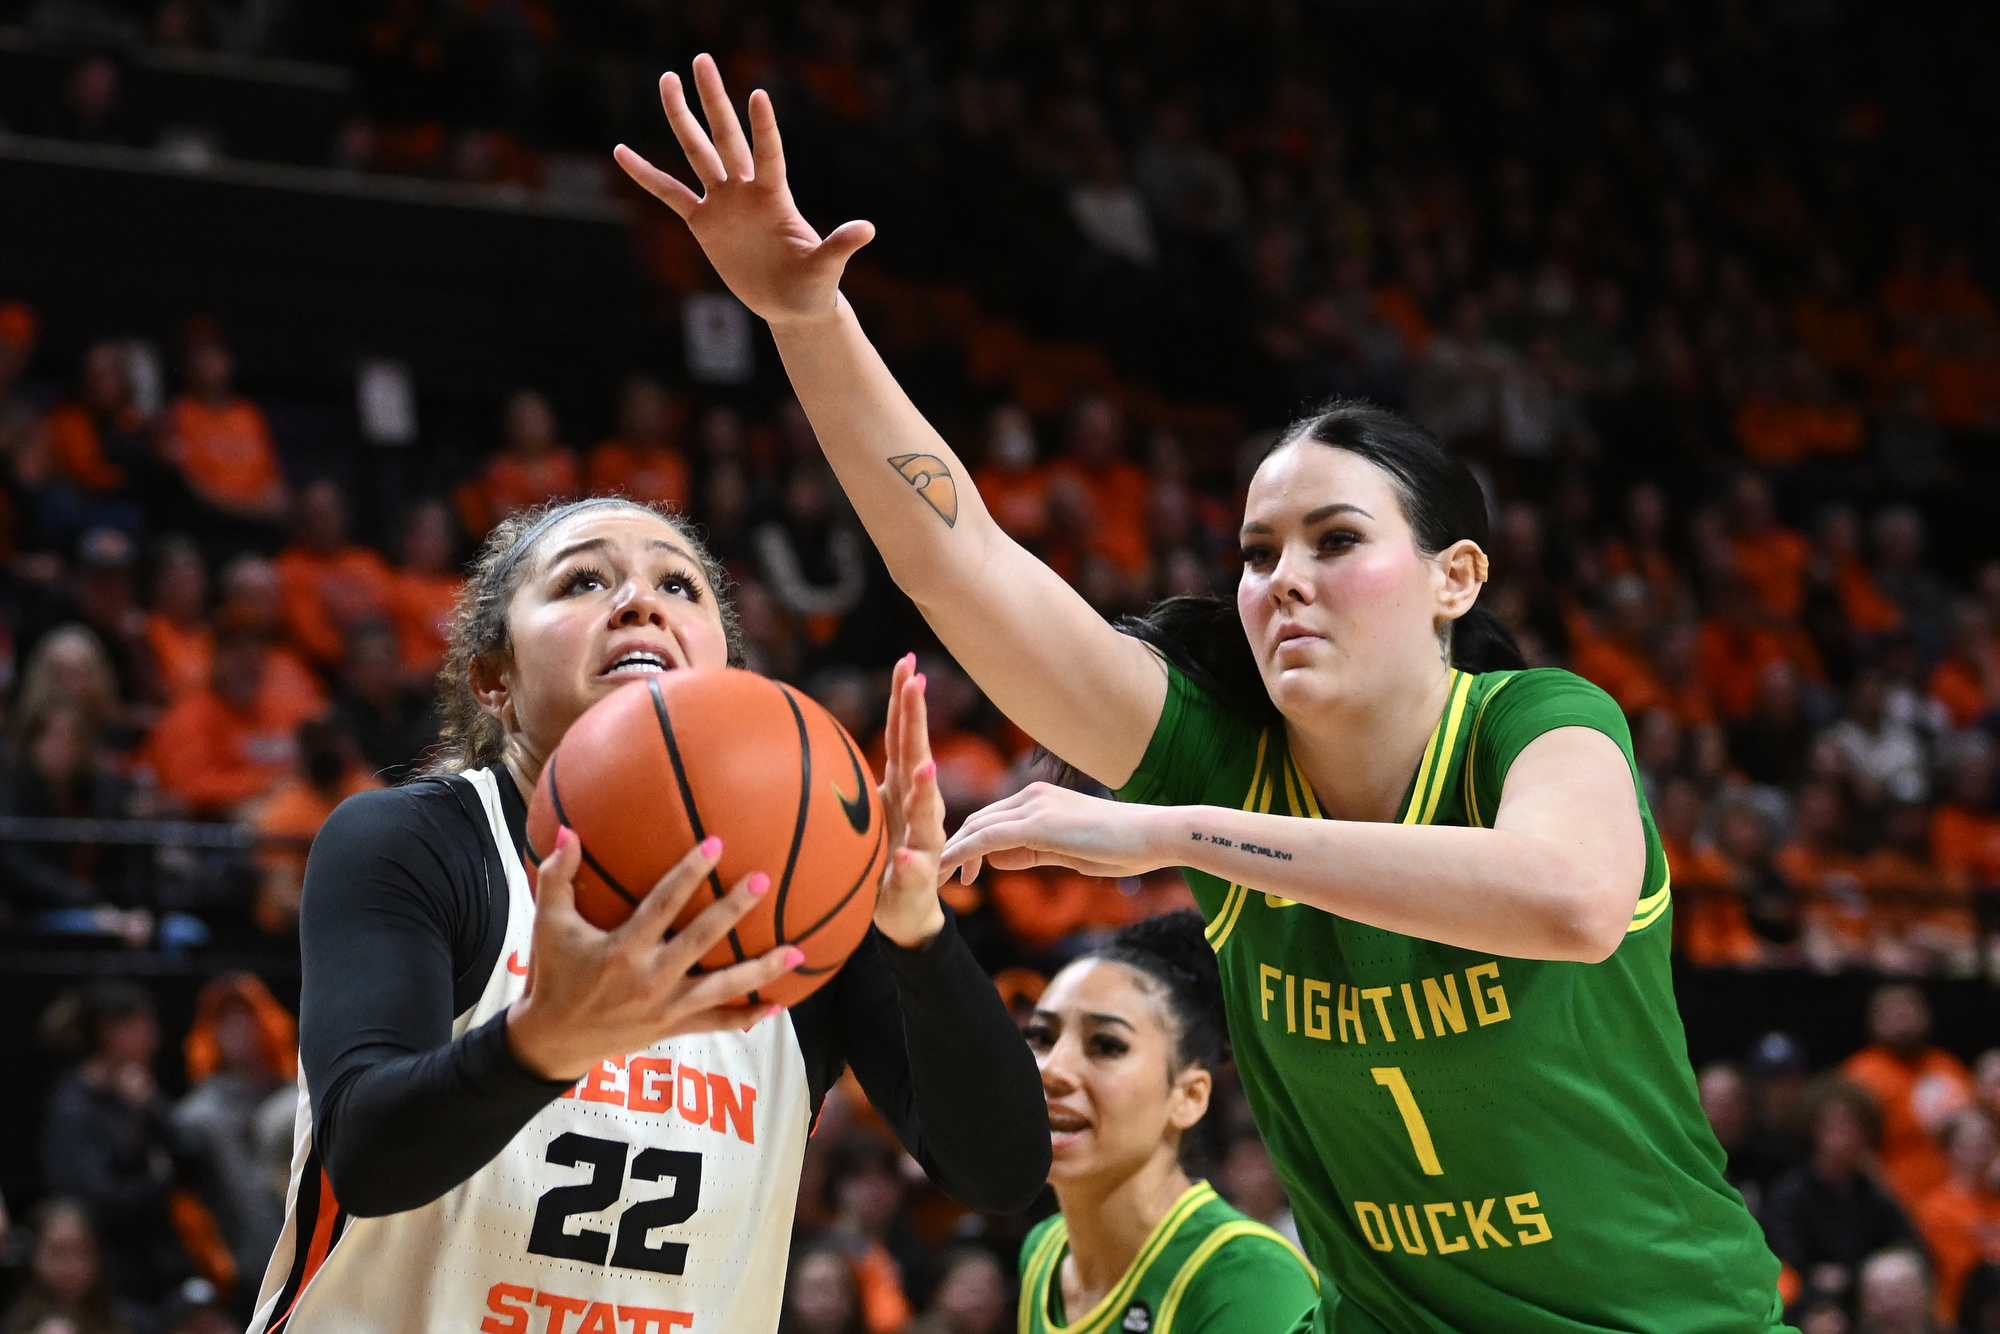 Oregon State Beavers at Washington State Cougars womens basketball score updates, live stream, TV channel (2/19/23)